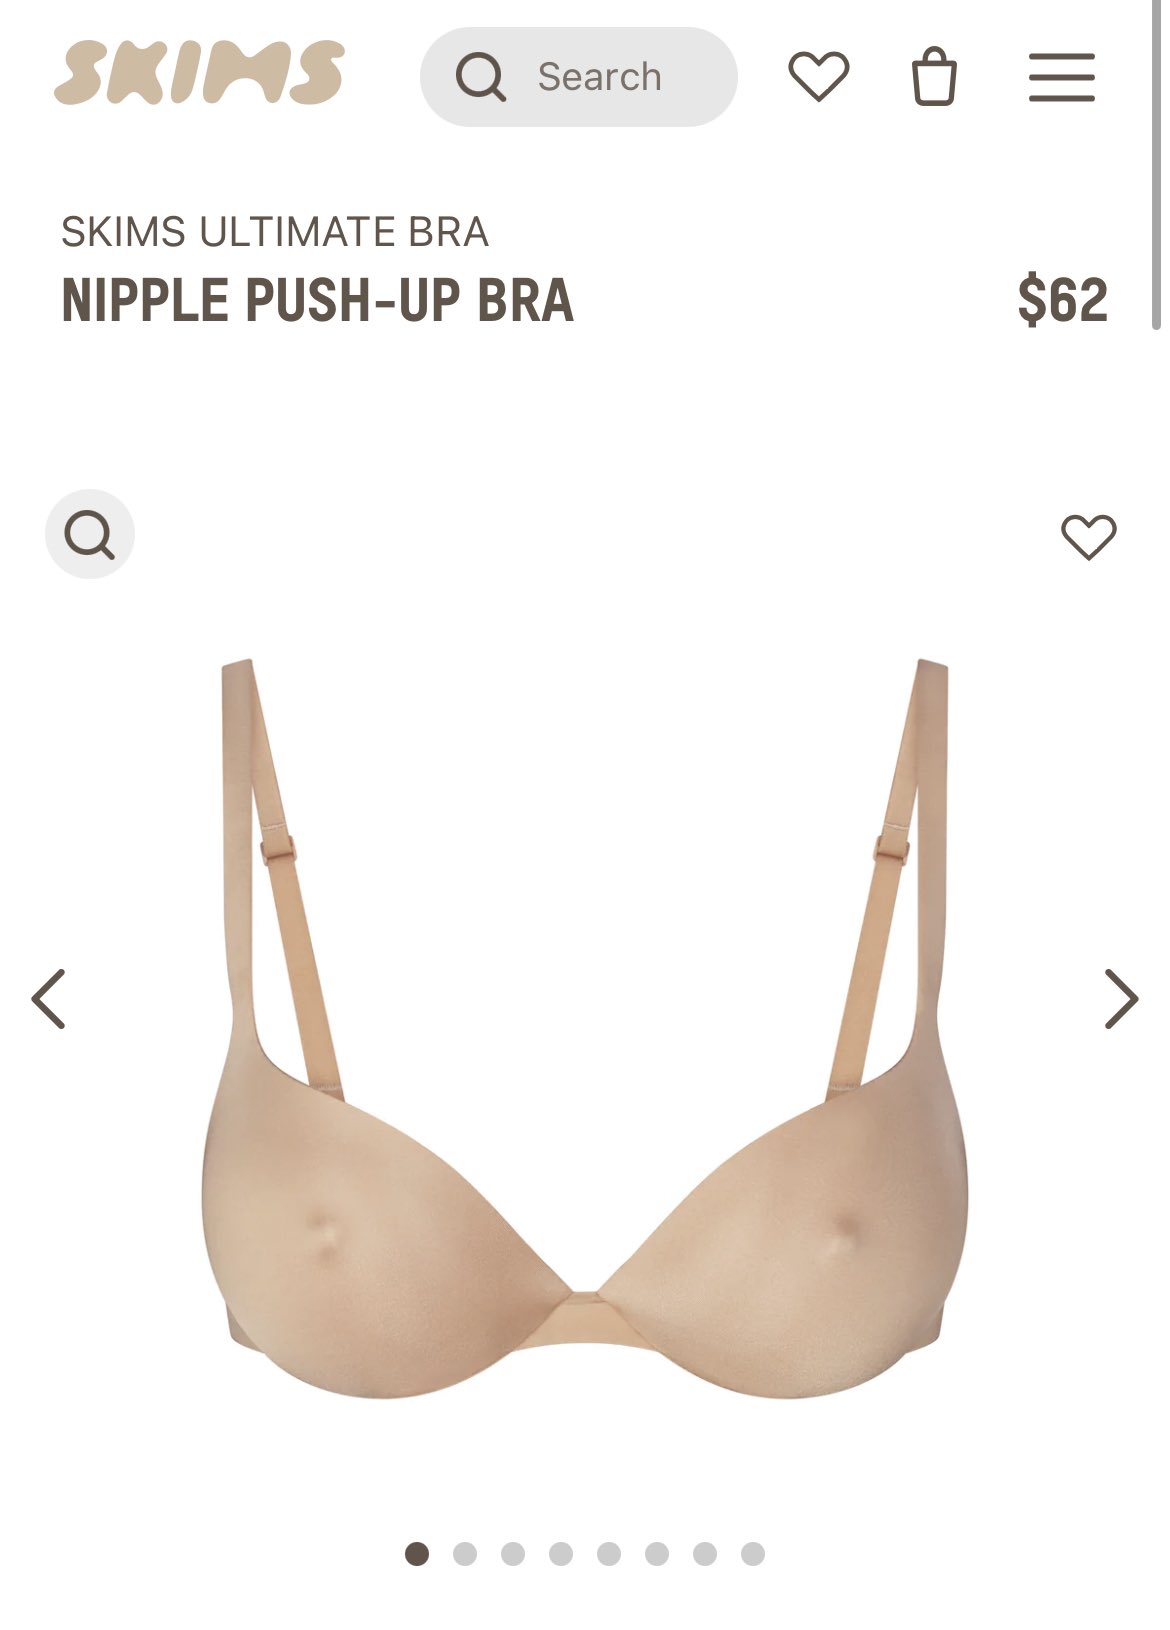 Tanya Chen on X: the nippled SKIMS bra is a healthy dose of